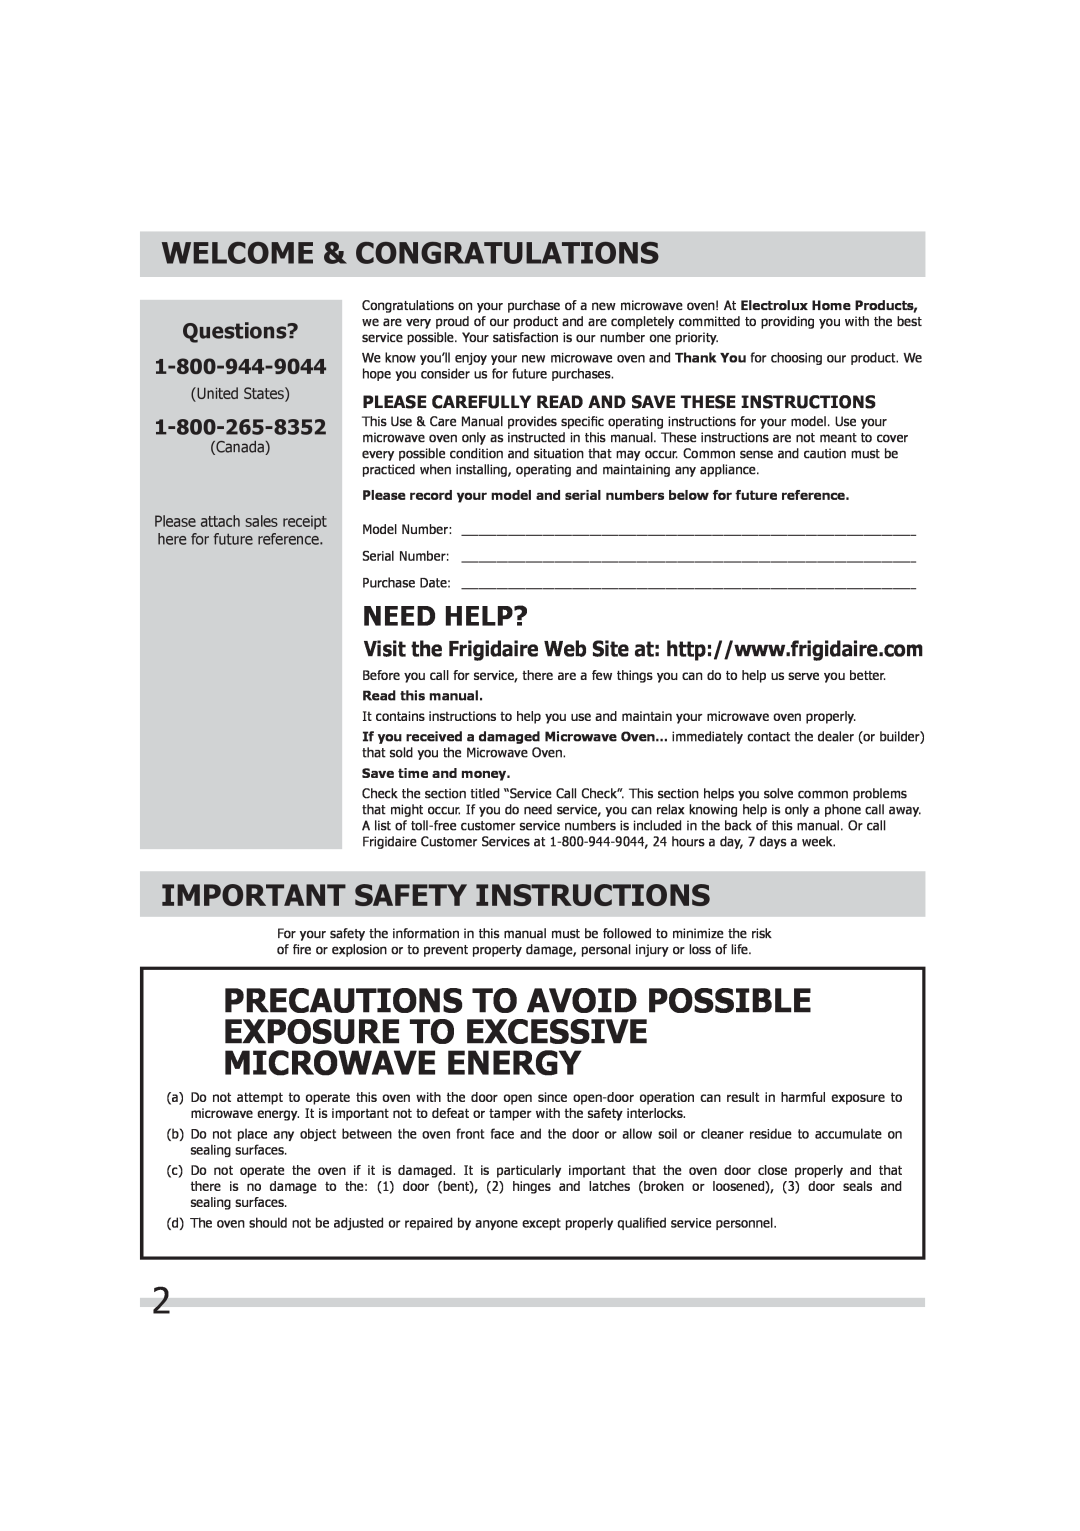 Frigidaire FGMV173KQ Welcome & Congratulations, Important Safety Instructions, Questions?, Need Help?, Read this manual 